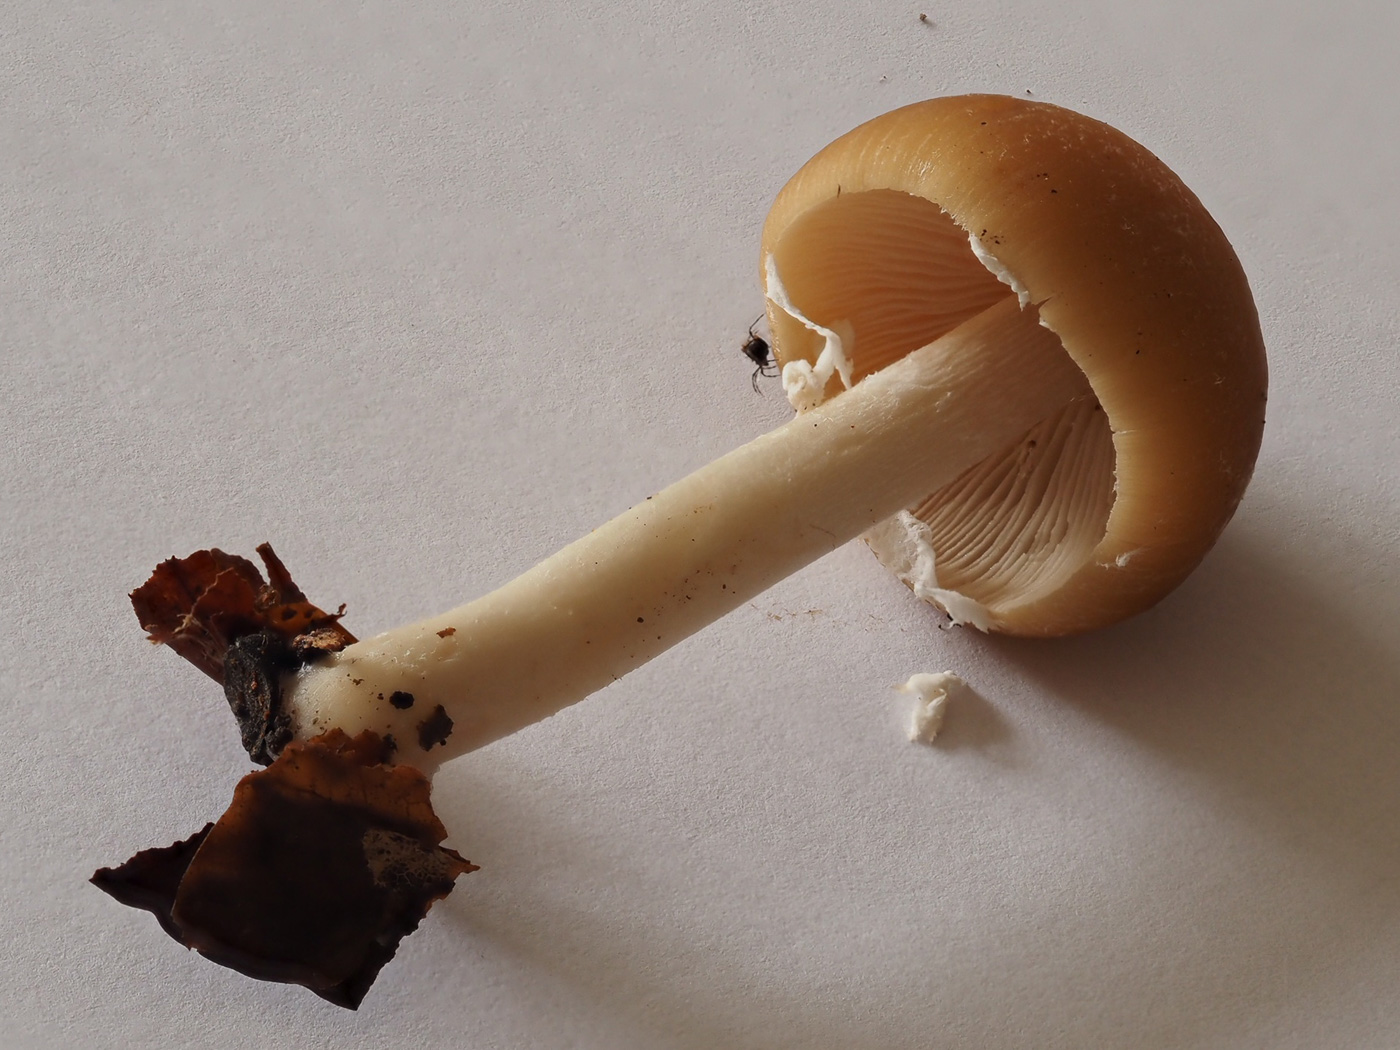 Psathyrella candolleana  by Claire Williams